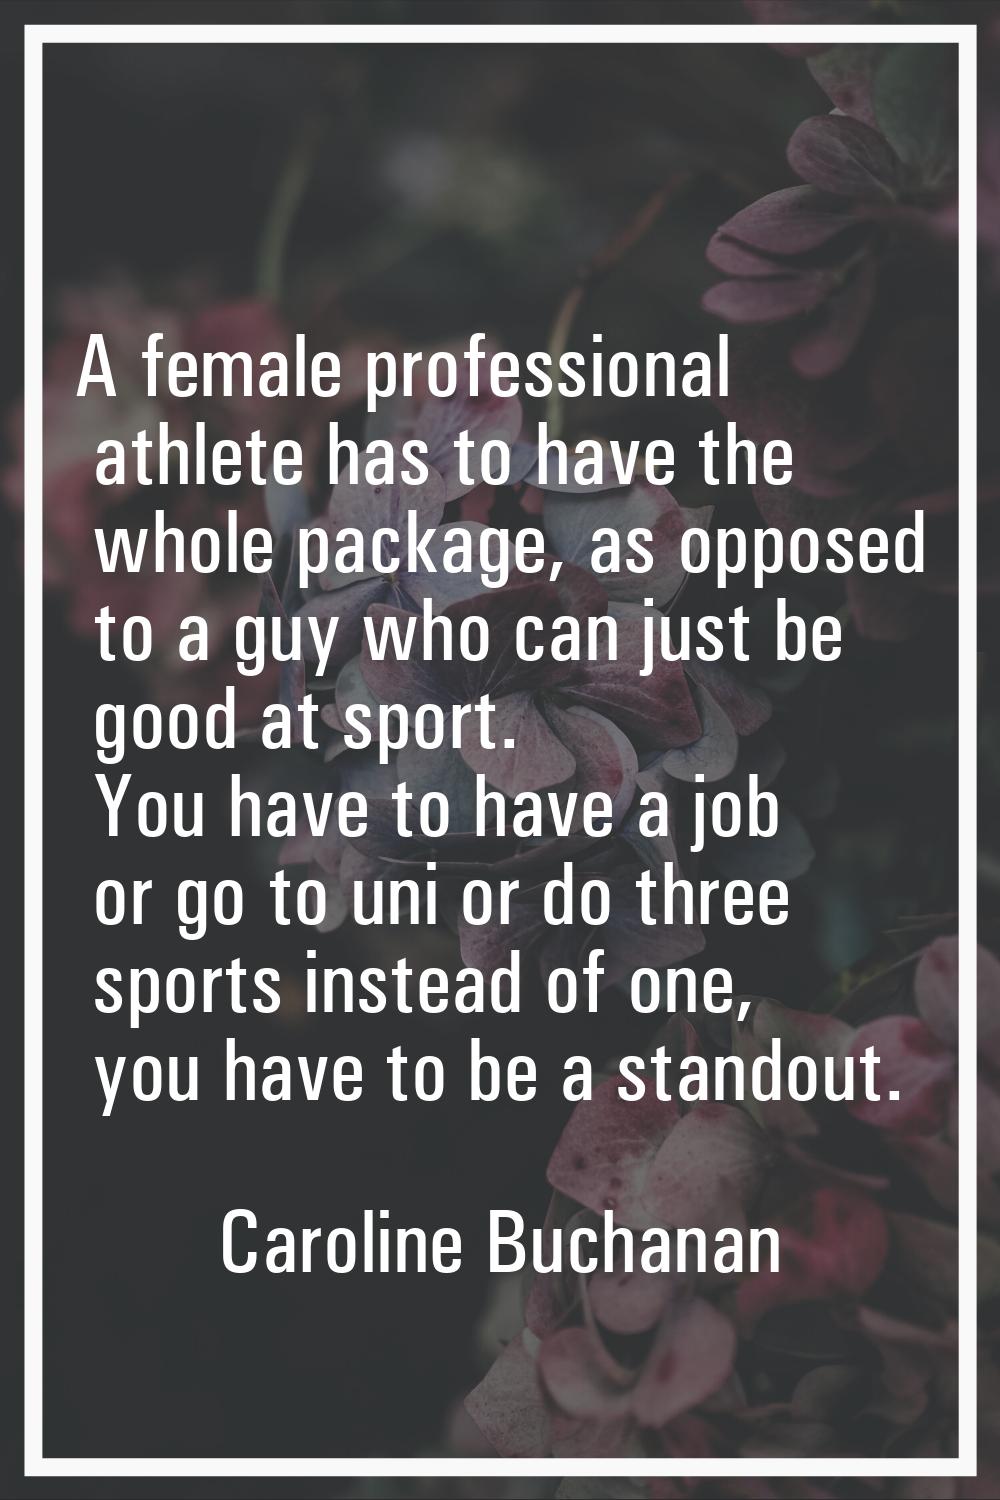 A female professional athlete has to have the whole package, as opposed to a guy who can just be go